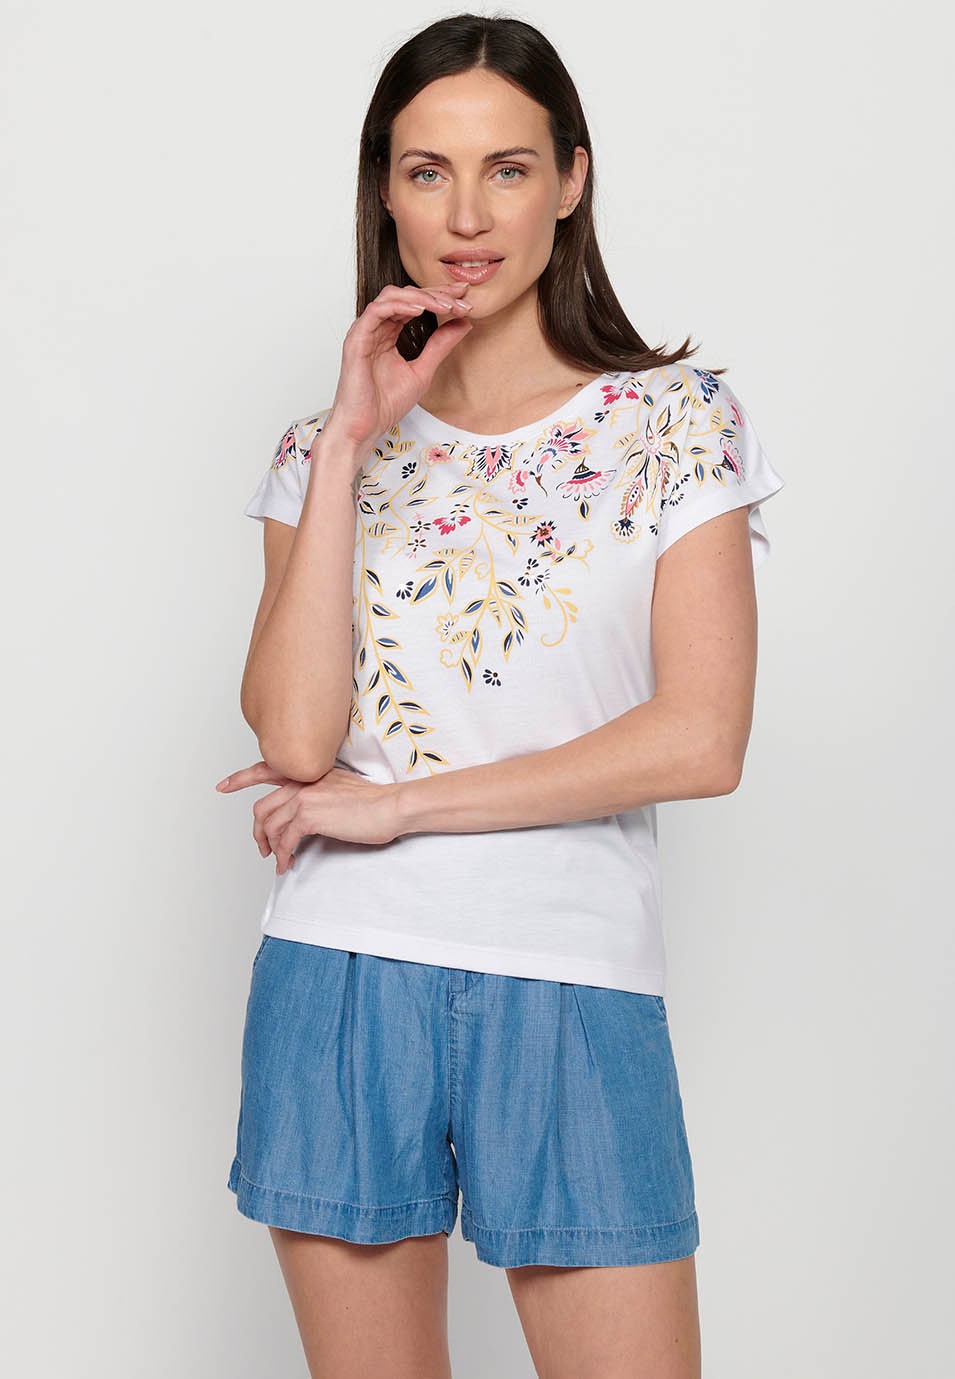 Women's White Round Neck Short Sleeve Cotton Top with Front Floral Embroidery